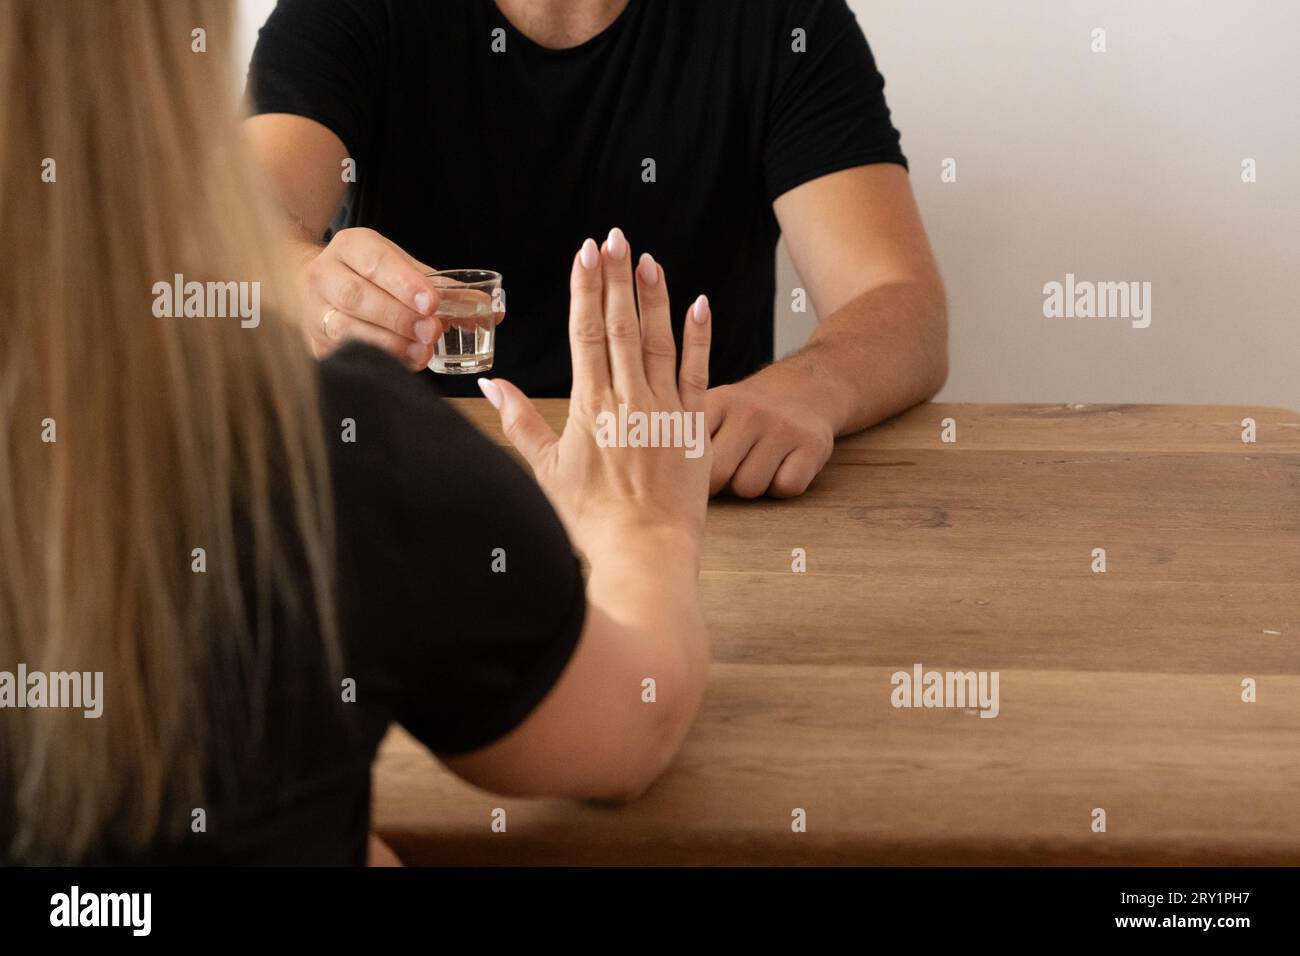 woman, refusing alcohol, not drinking vodka, alcohol-free New Year's Eve, NOLO, abstinence, tackling alcohol issues, saying no to drinks at social gat Stock Photo